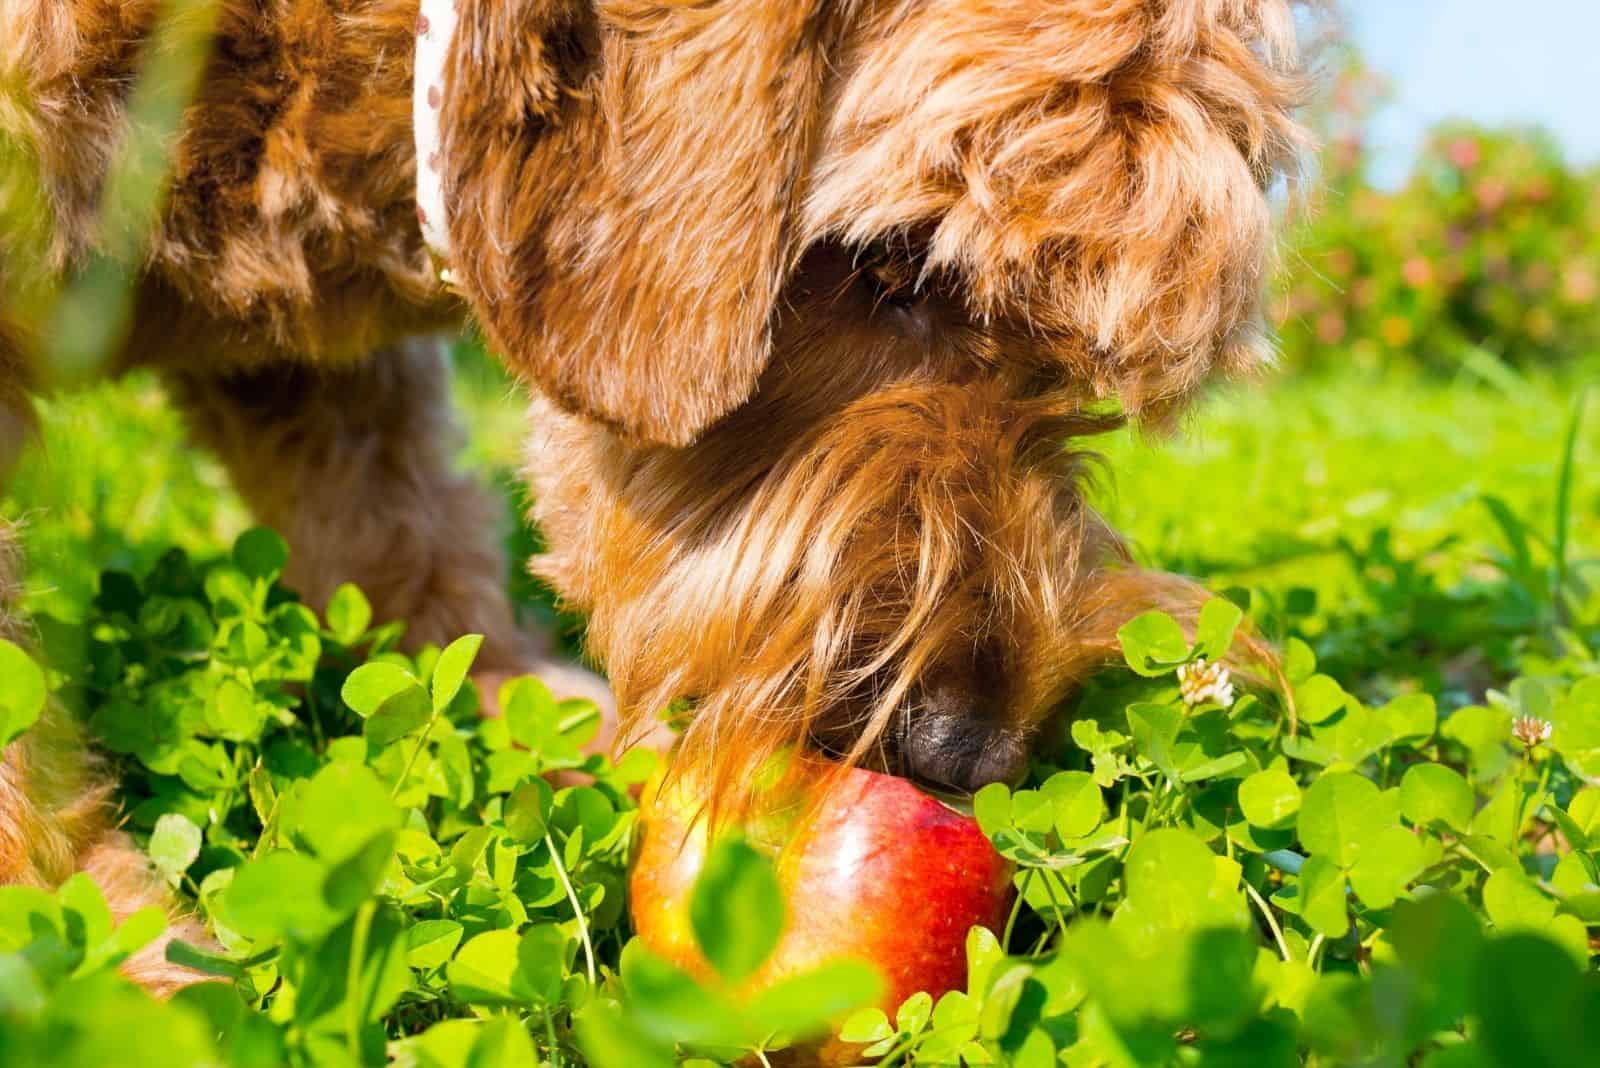 goldendoodle eating fruit outdoors in focus photography